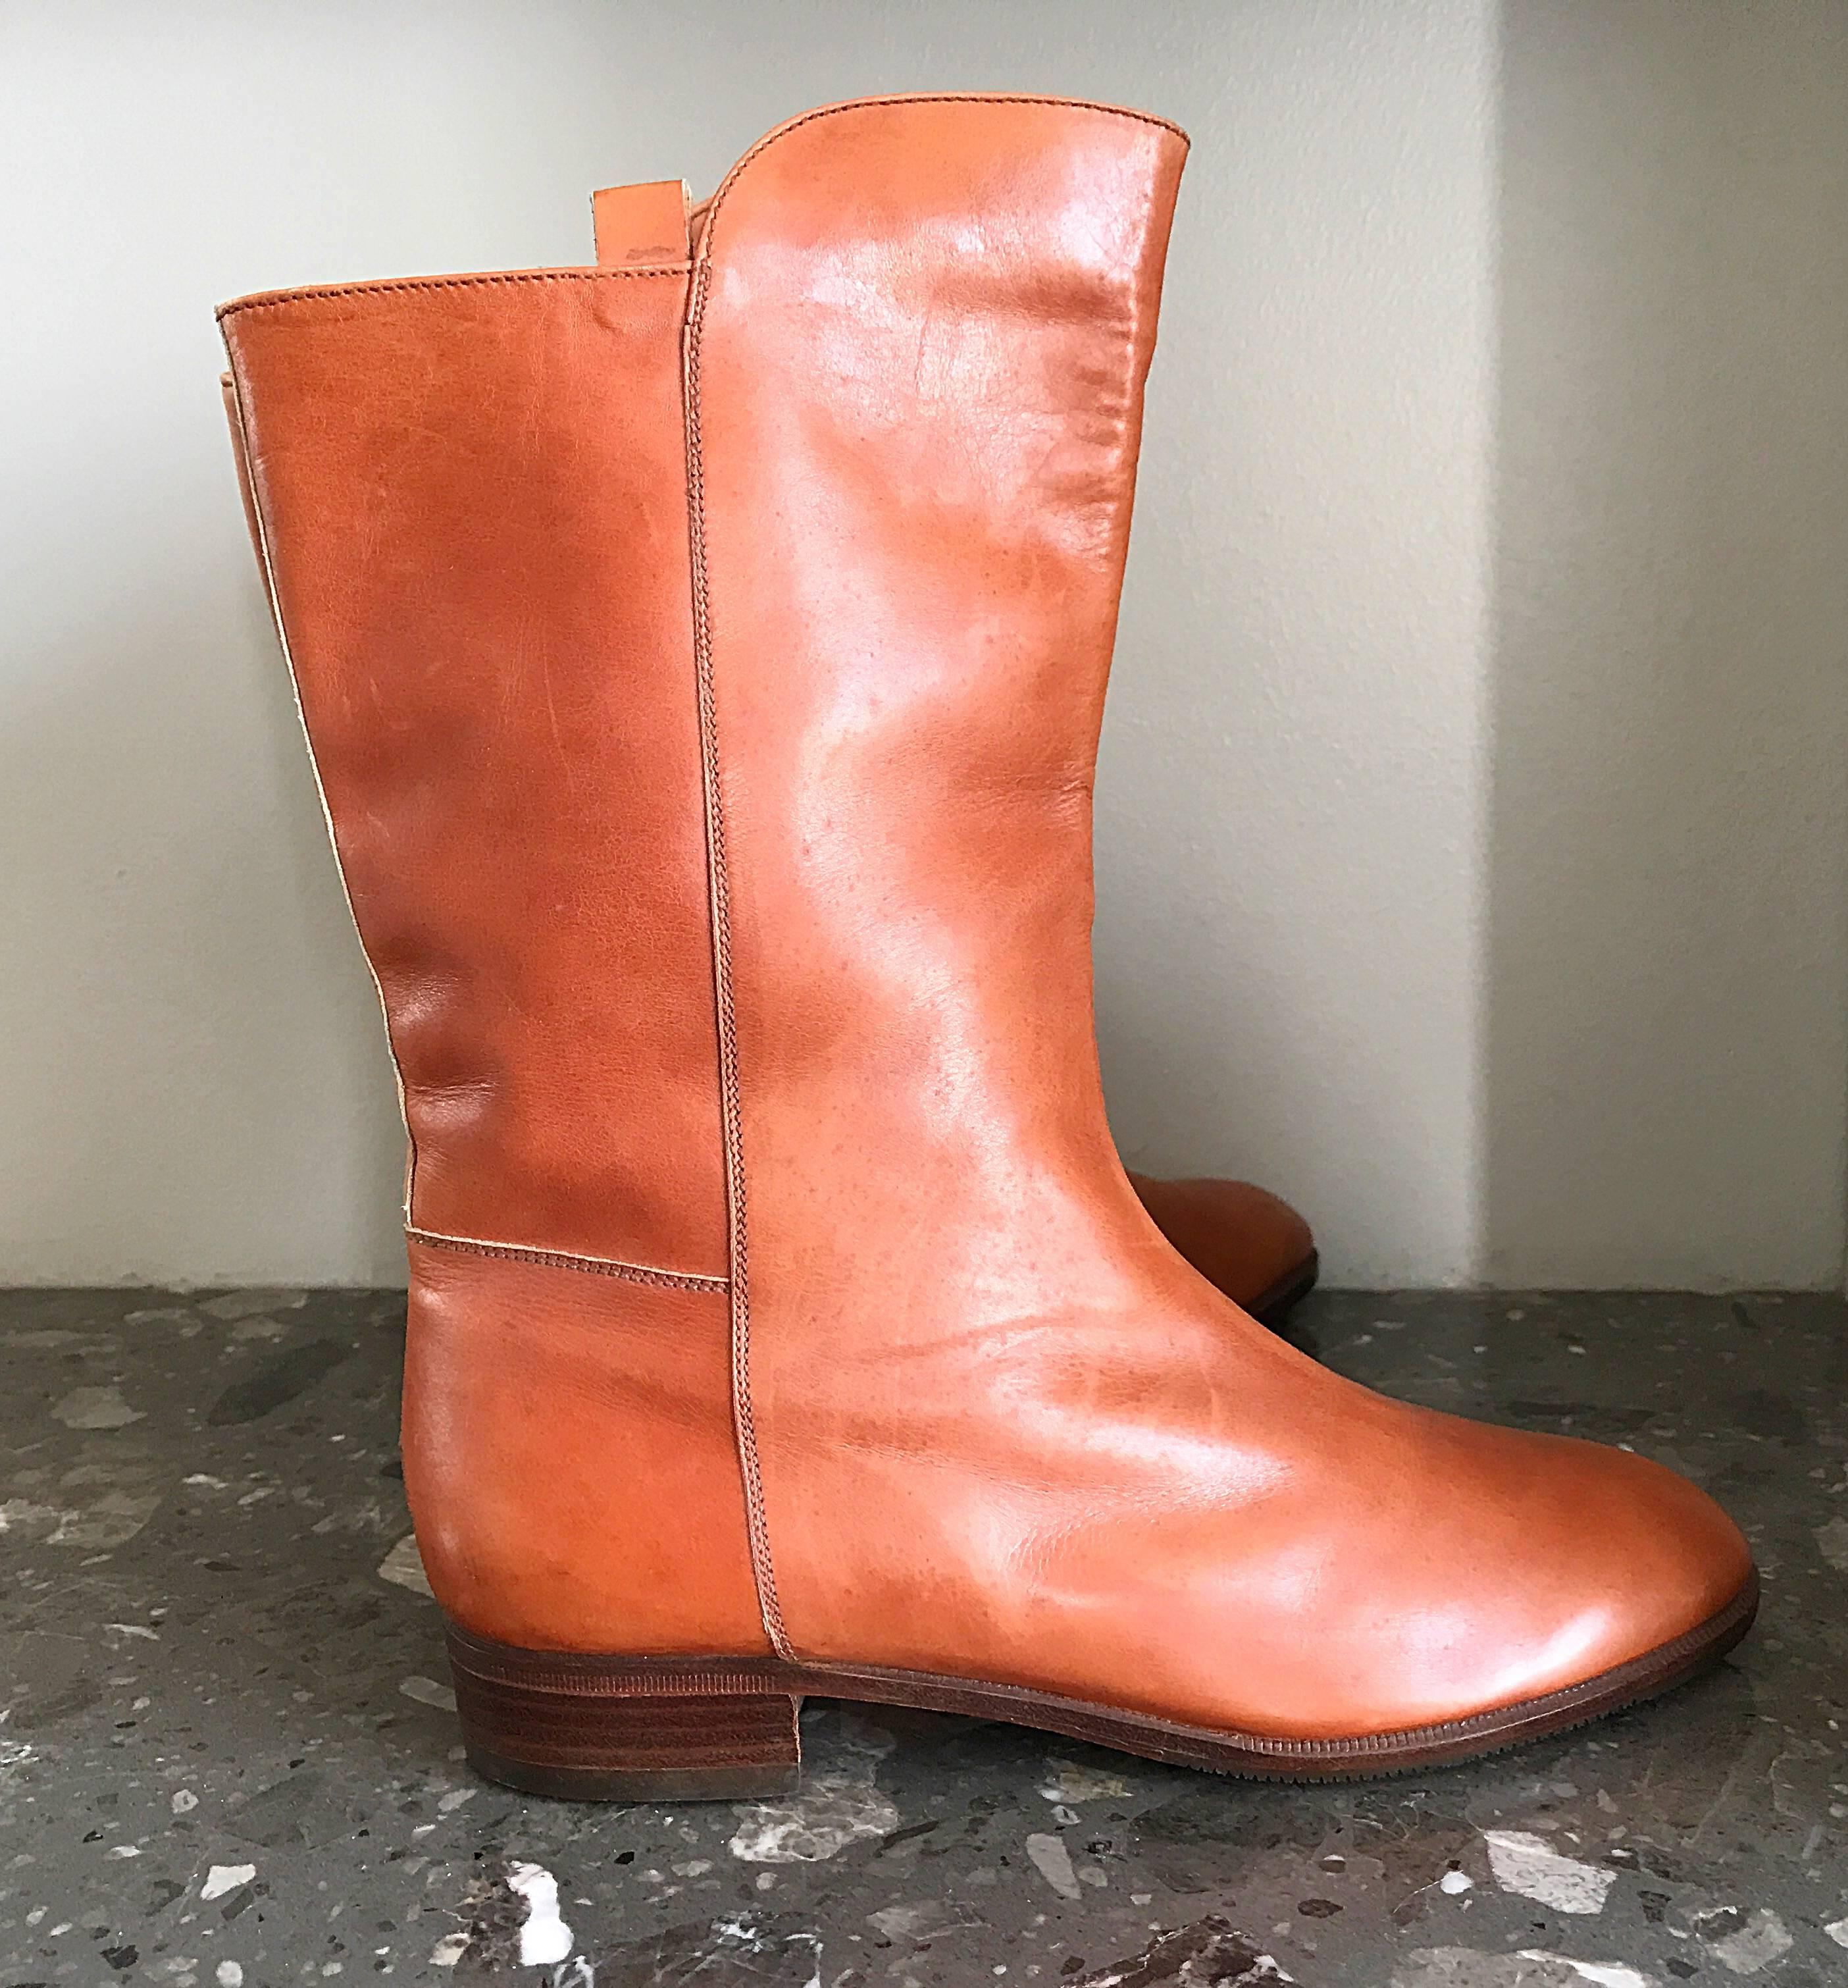 New 1980 Perry Ellis Size 6 Tan Saddle Leather Deadstock Calf Booties Boots en vente 1